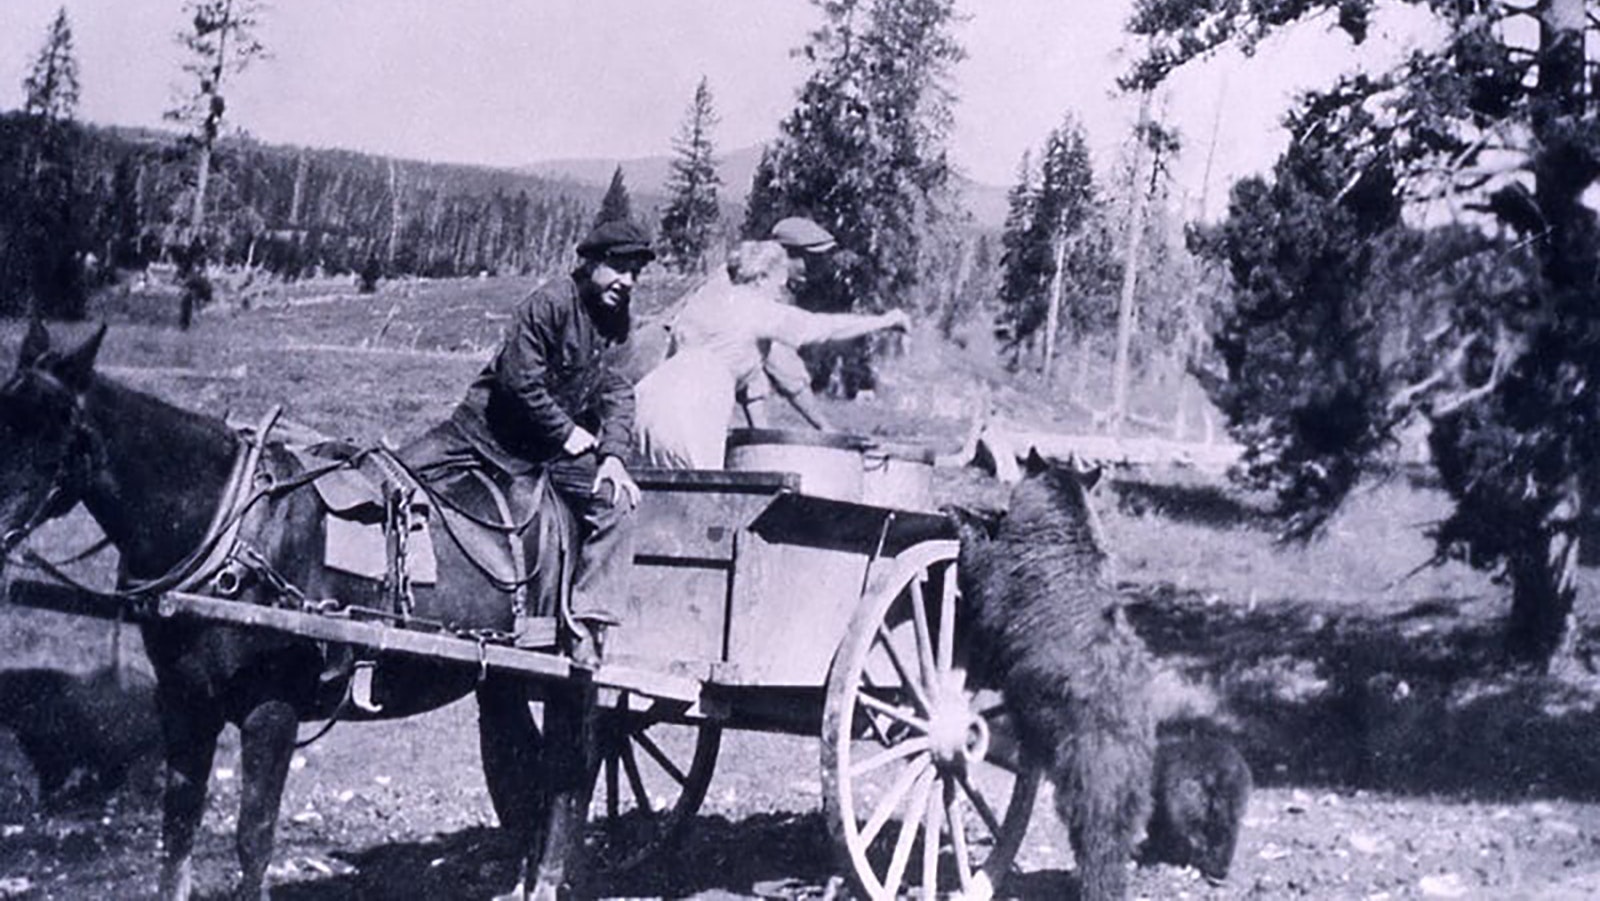 A couple of tourists ride on the garbage cart feeding park bears as they travel.